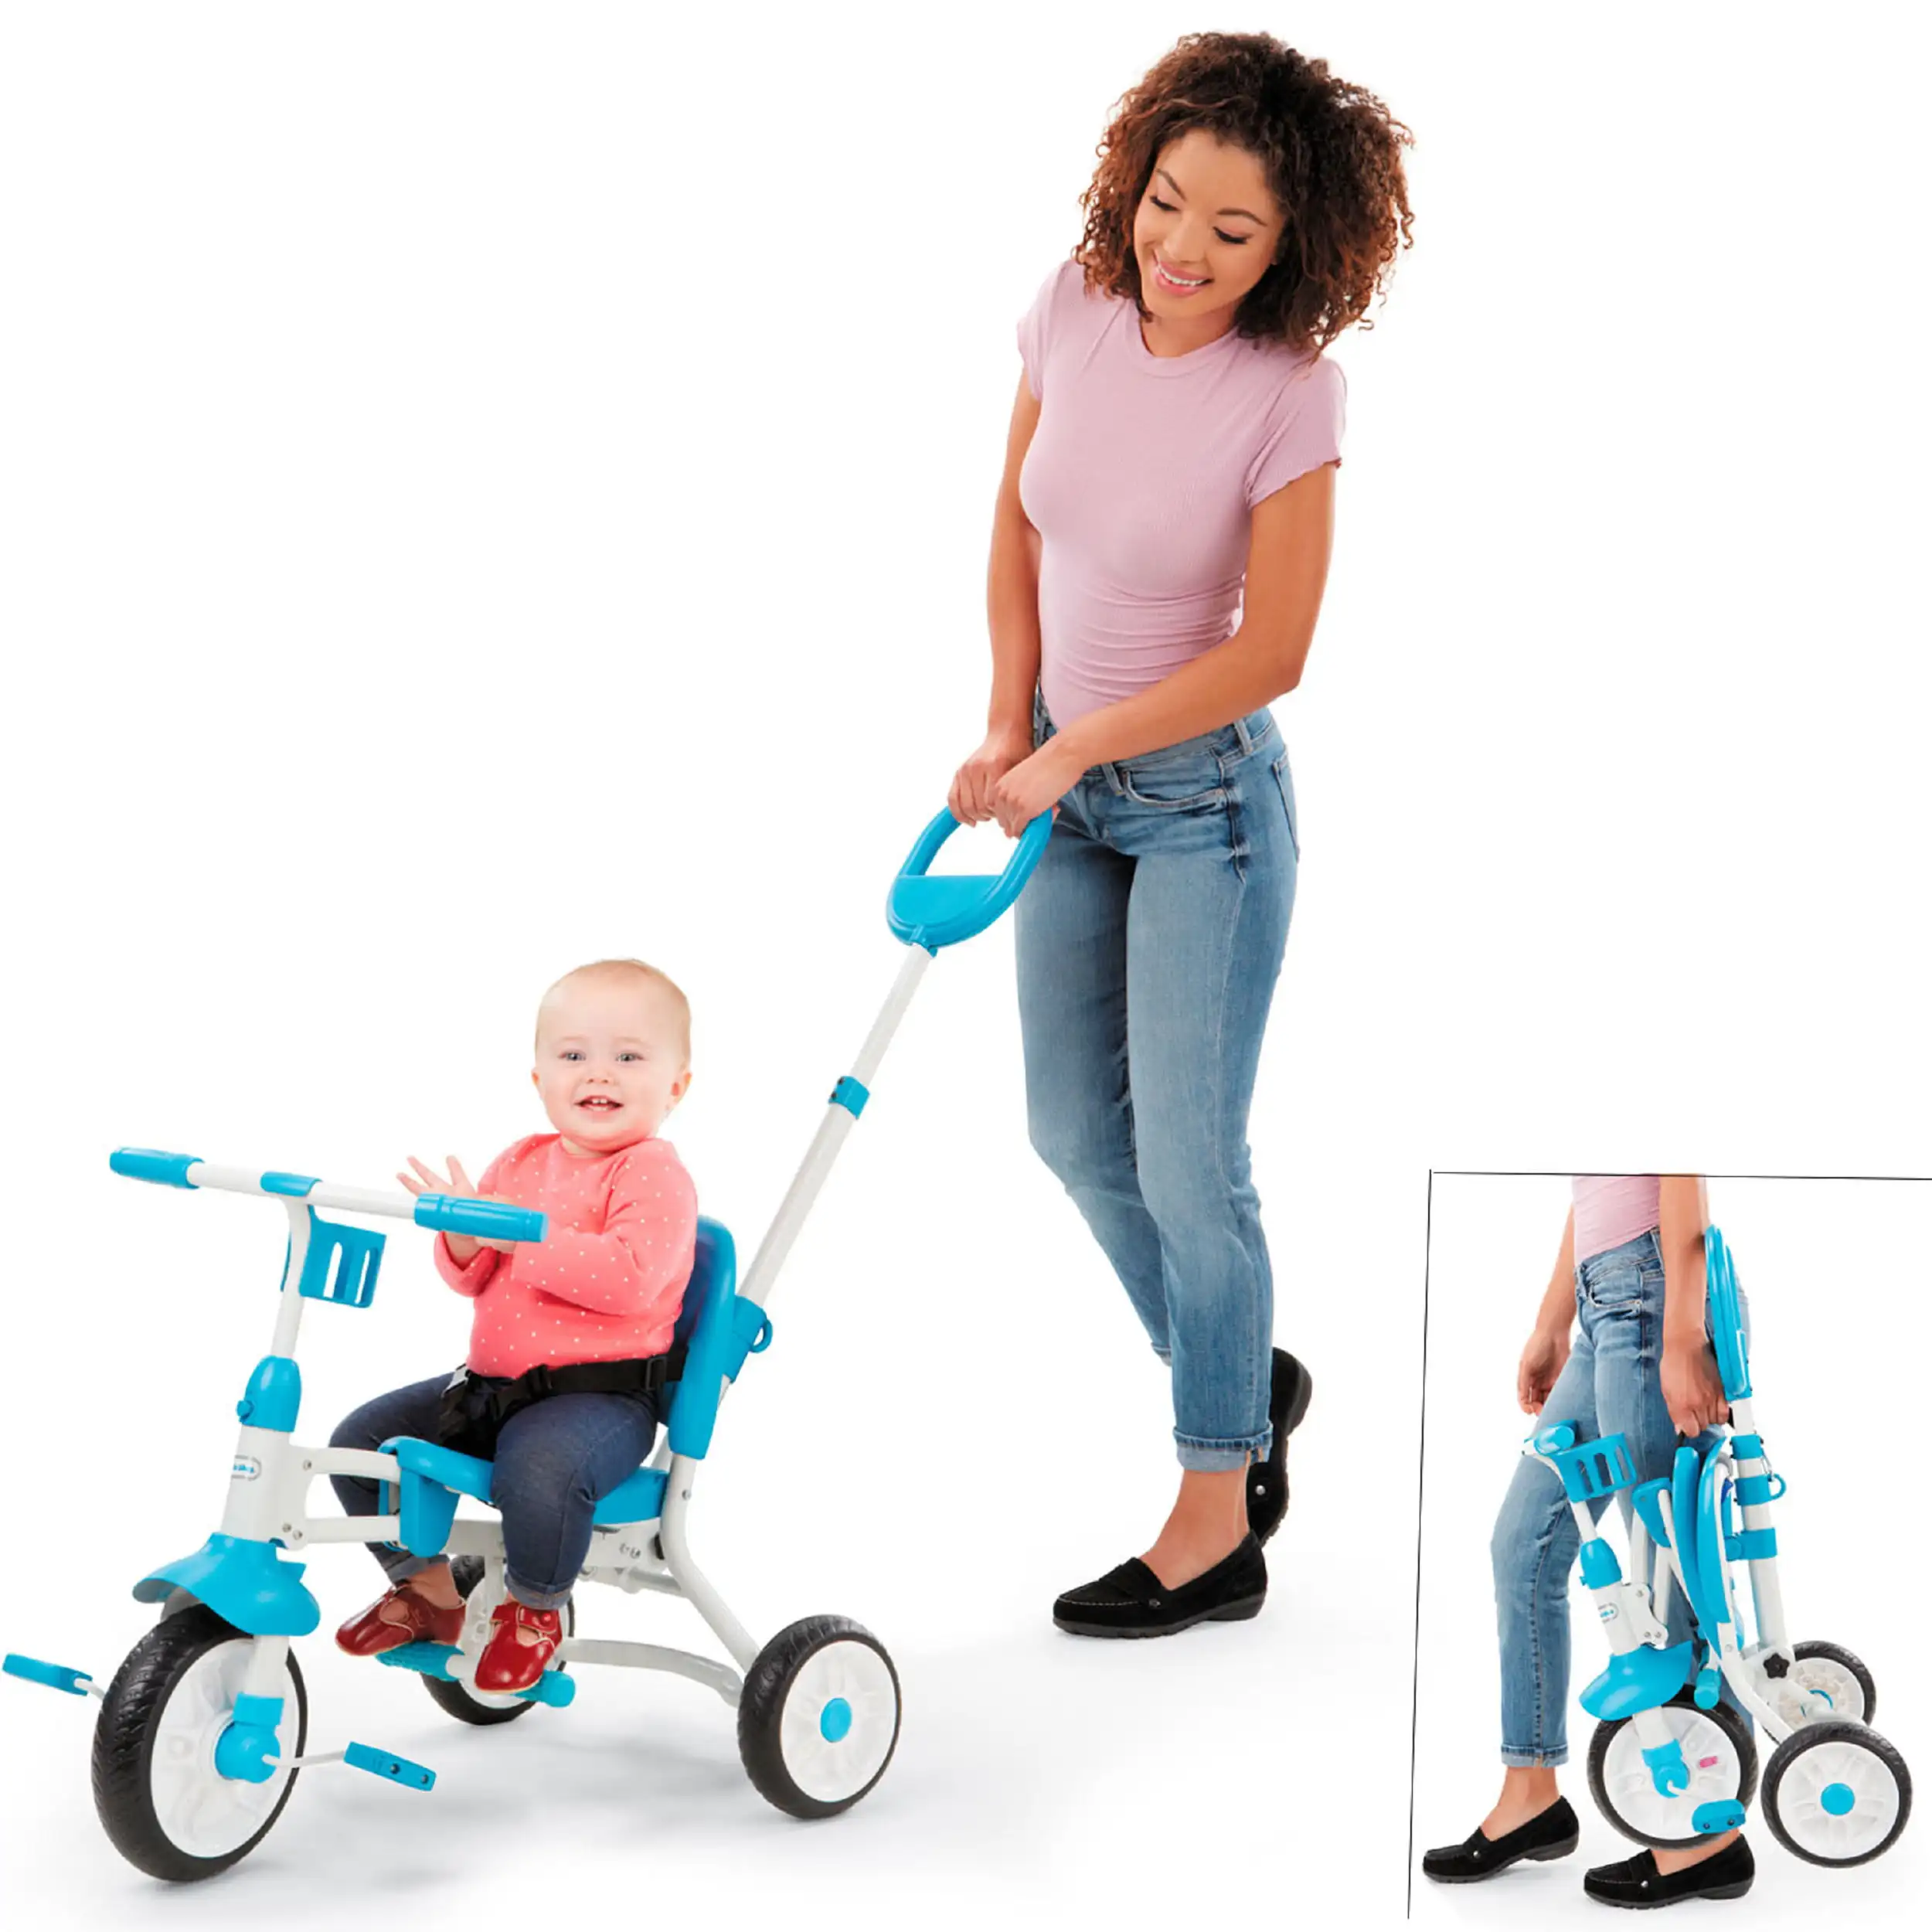 

Pack 'n Go Trike in Blue, Convertible Tricycle for Toddlers with 3 Stages of Growth- For Kids Boys Ages 12 Months to 5 Years Old